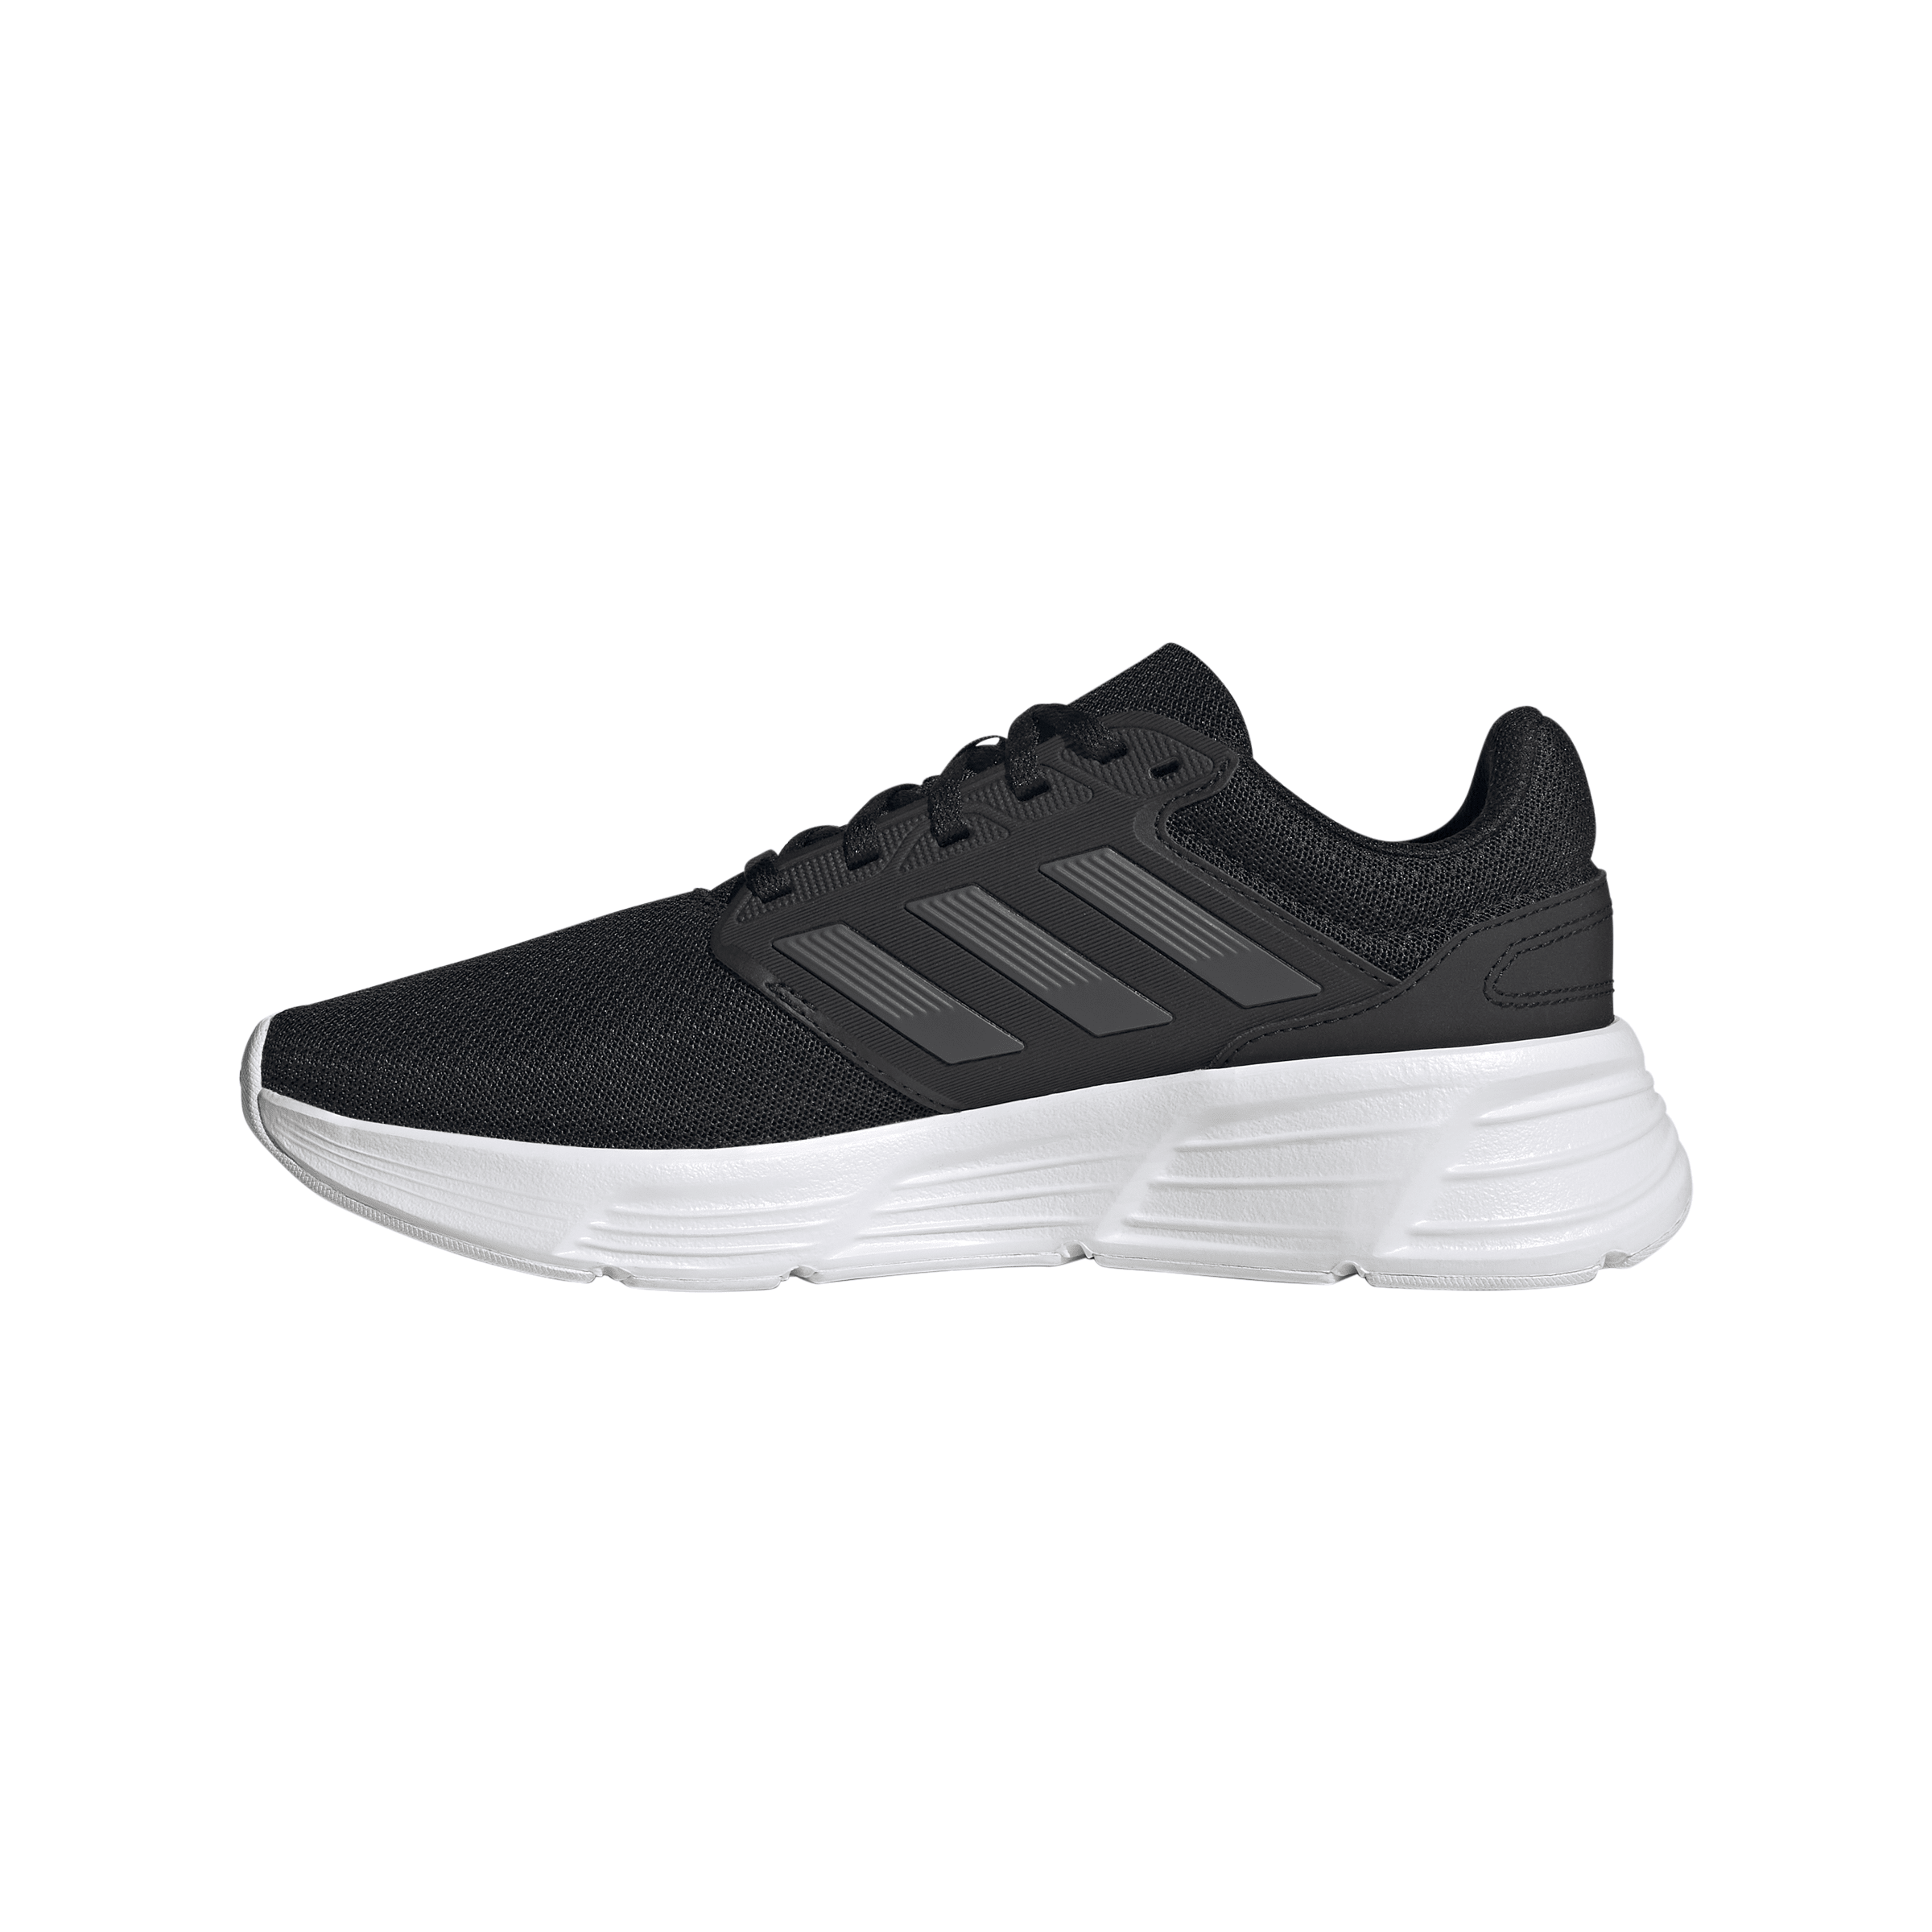 Adidas Galaxy 6 Shoes for Men